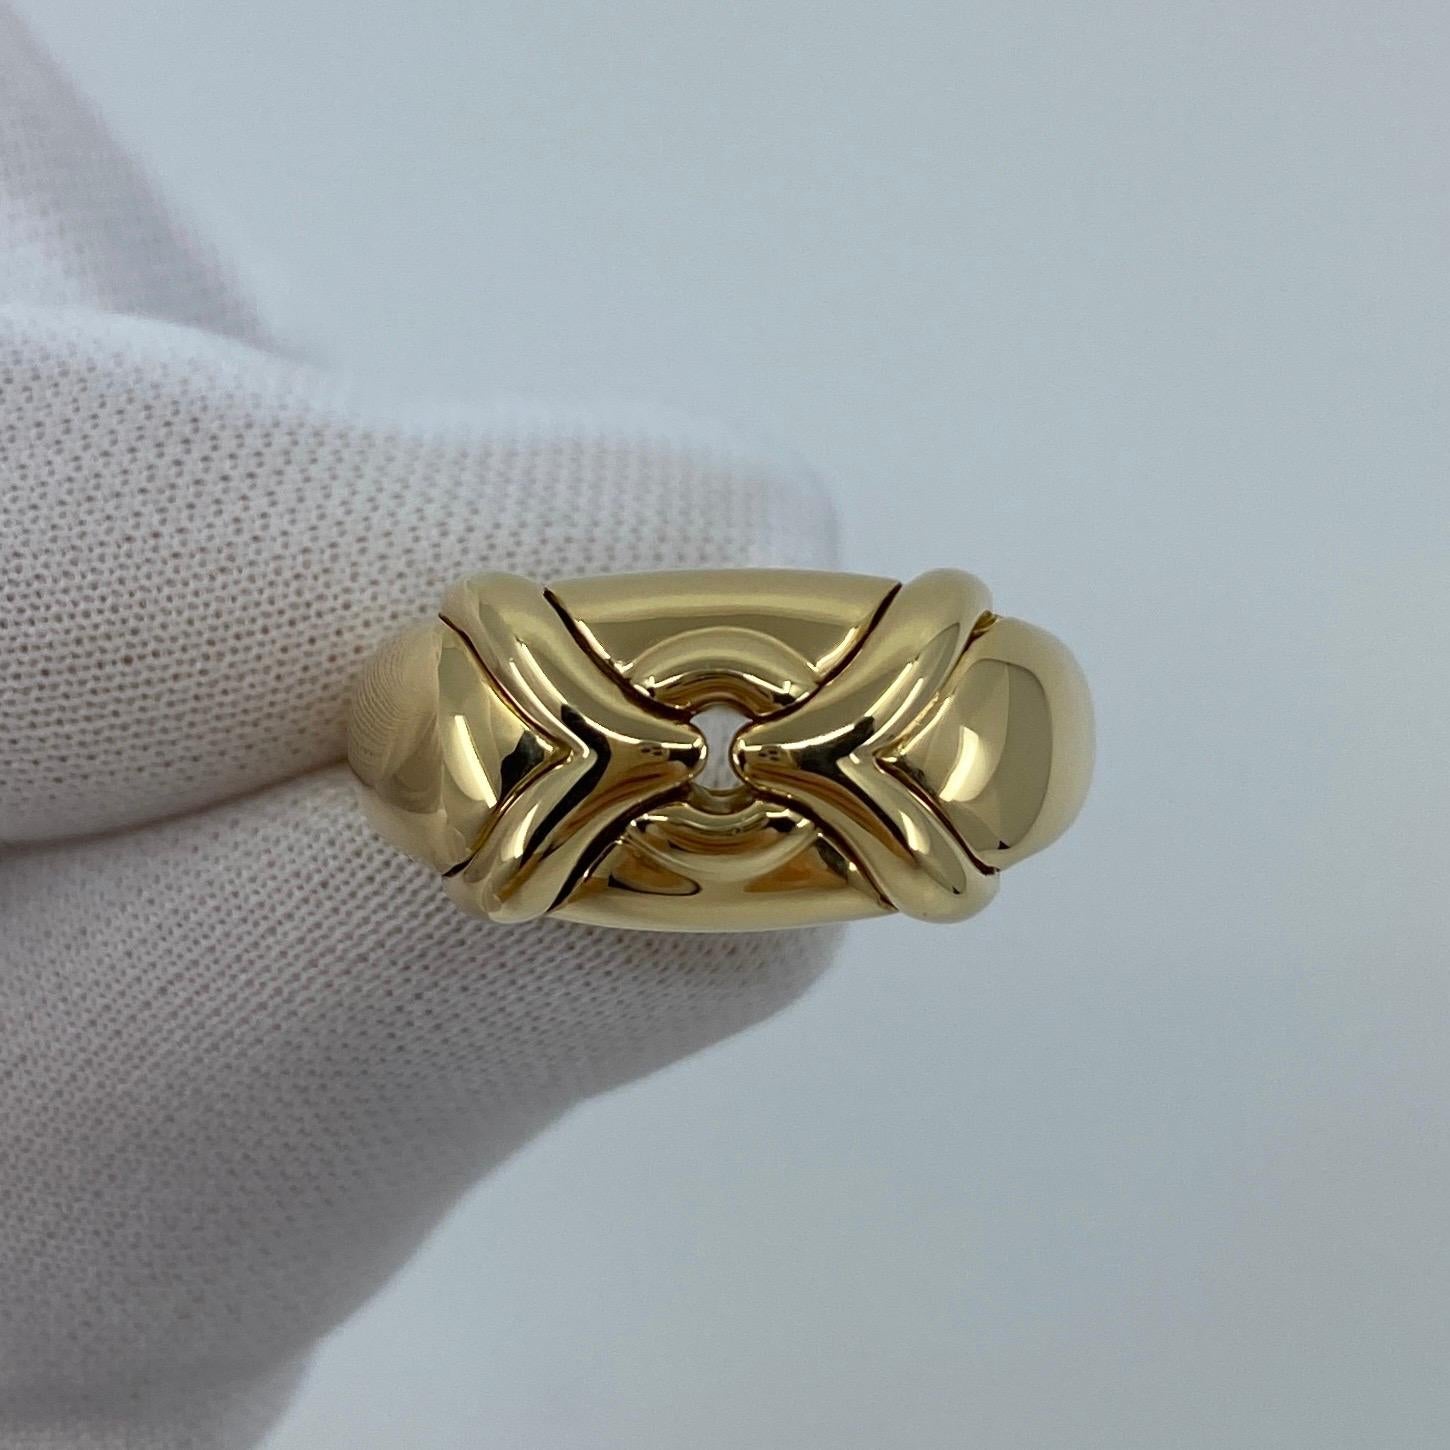 Rare Vintage 18k Yellow Gold Bvlgari Ring.

This stylish design features a uniquely Bvlgari motif and heavy, well made design, 11.32g.

In excellent condition, has been professionally cleaned and polished. 'Like new' condition.

Signed Bvlgari 750